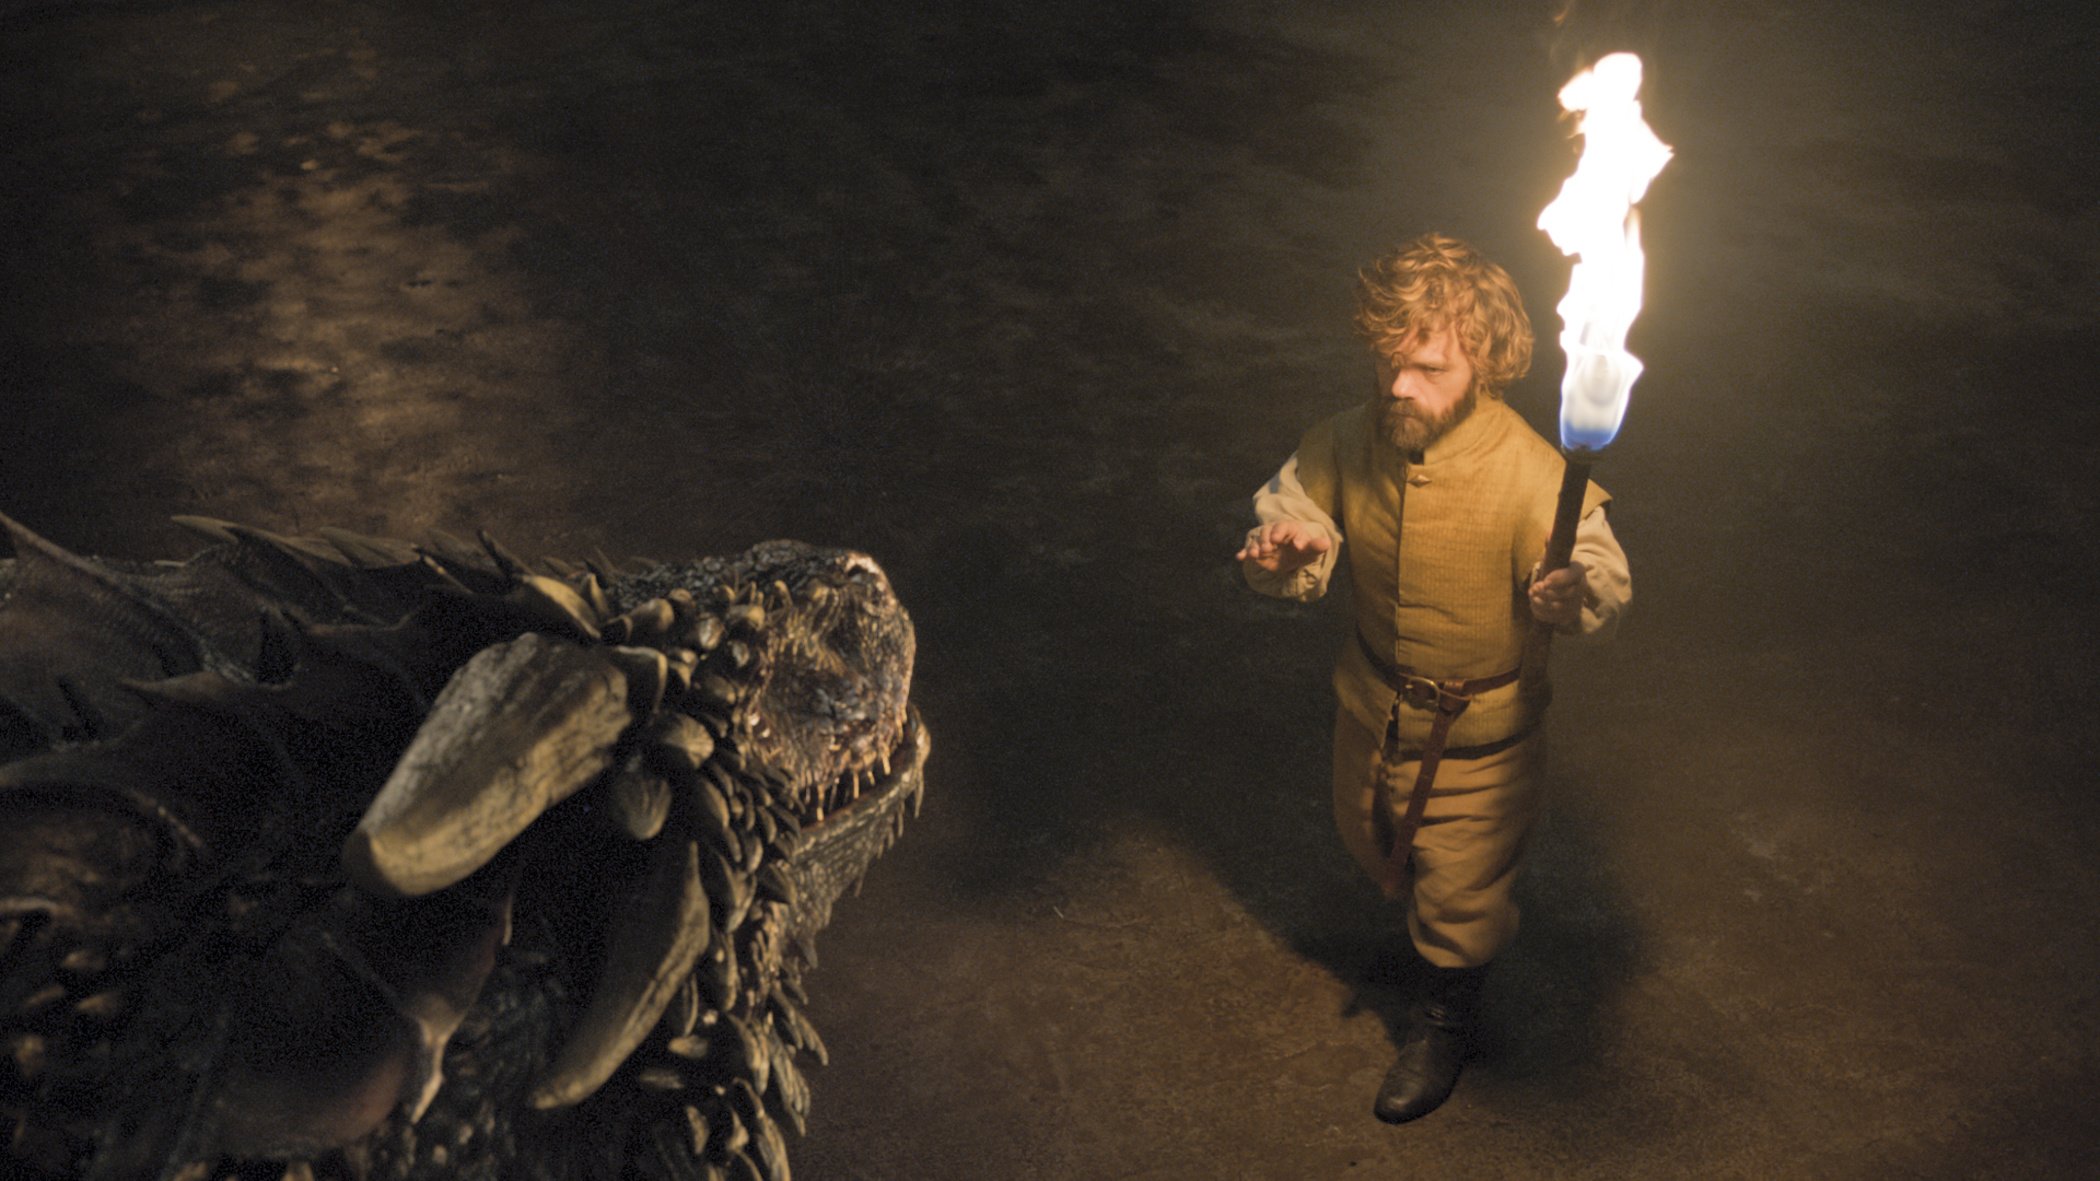 tyrion_lannister_and_dragon_game_of_thrones.jpg